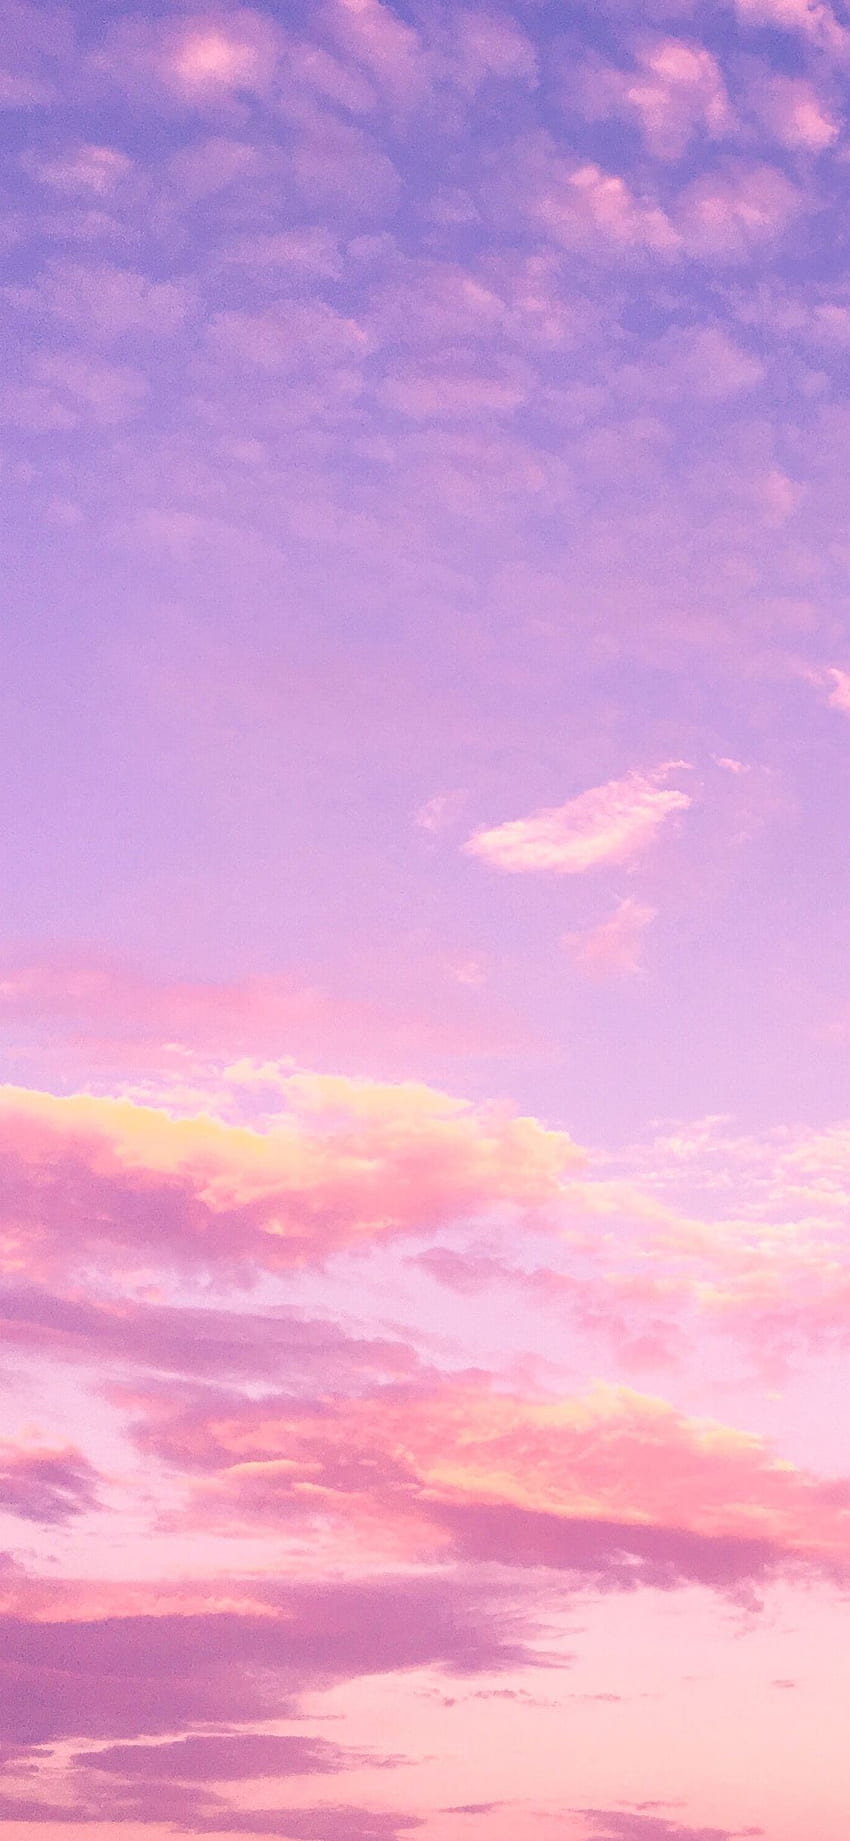 15 Aesthetic Cloud Wallpapers For Your Phone  The Violet Journal